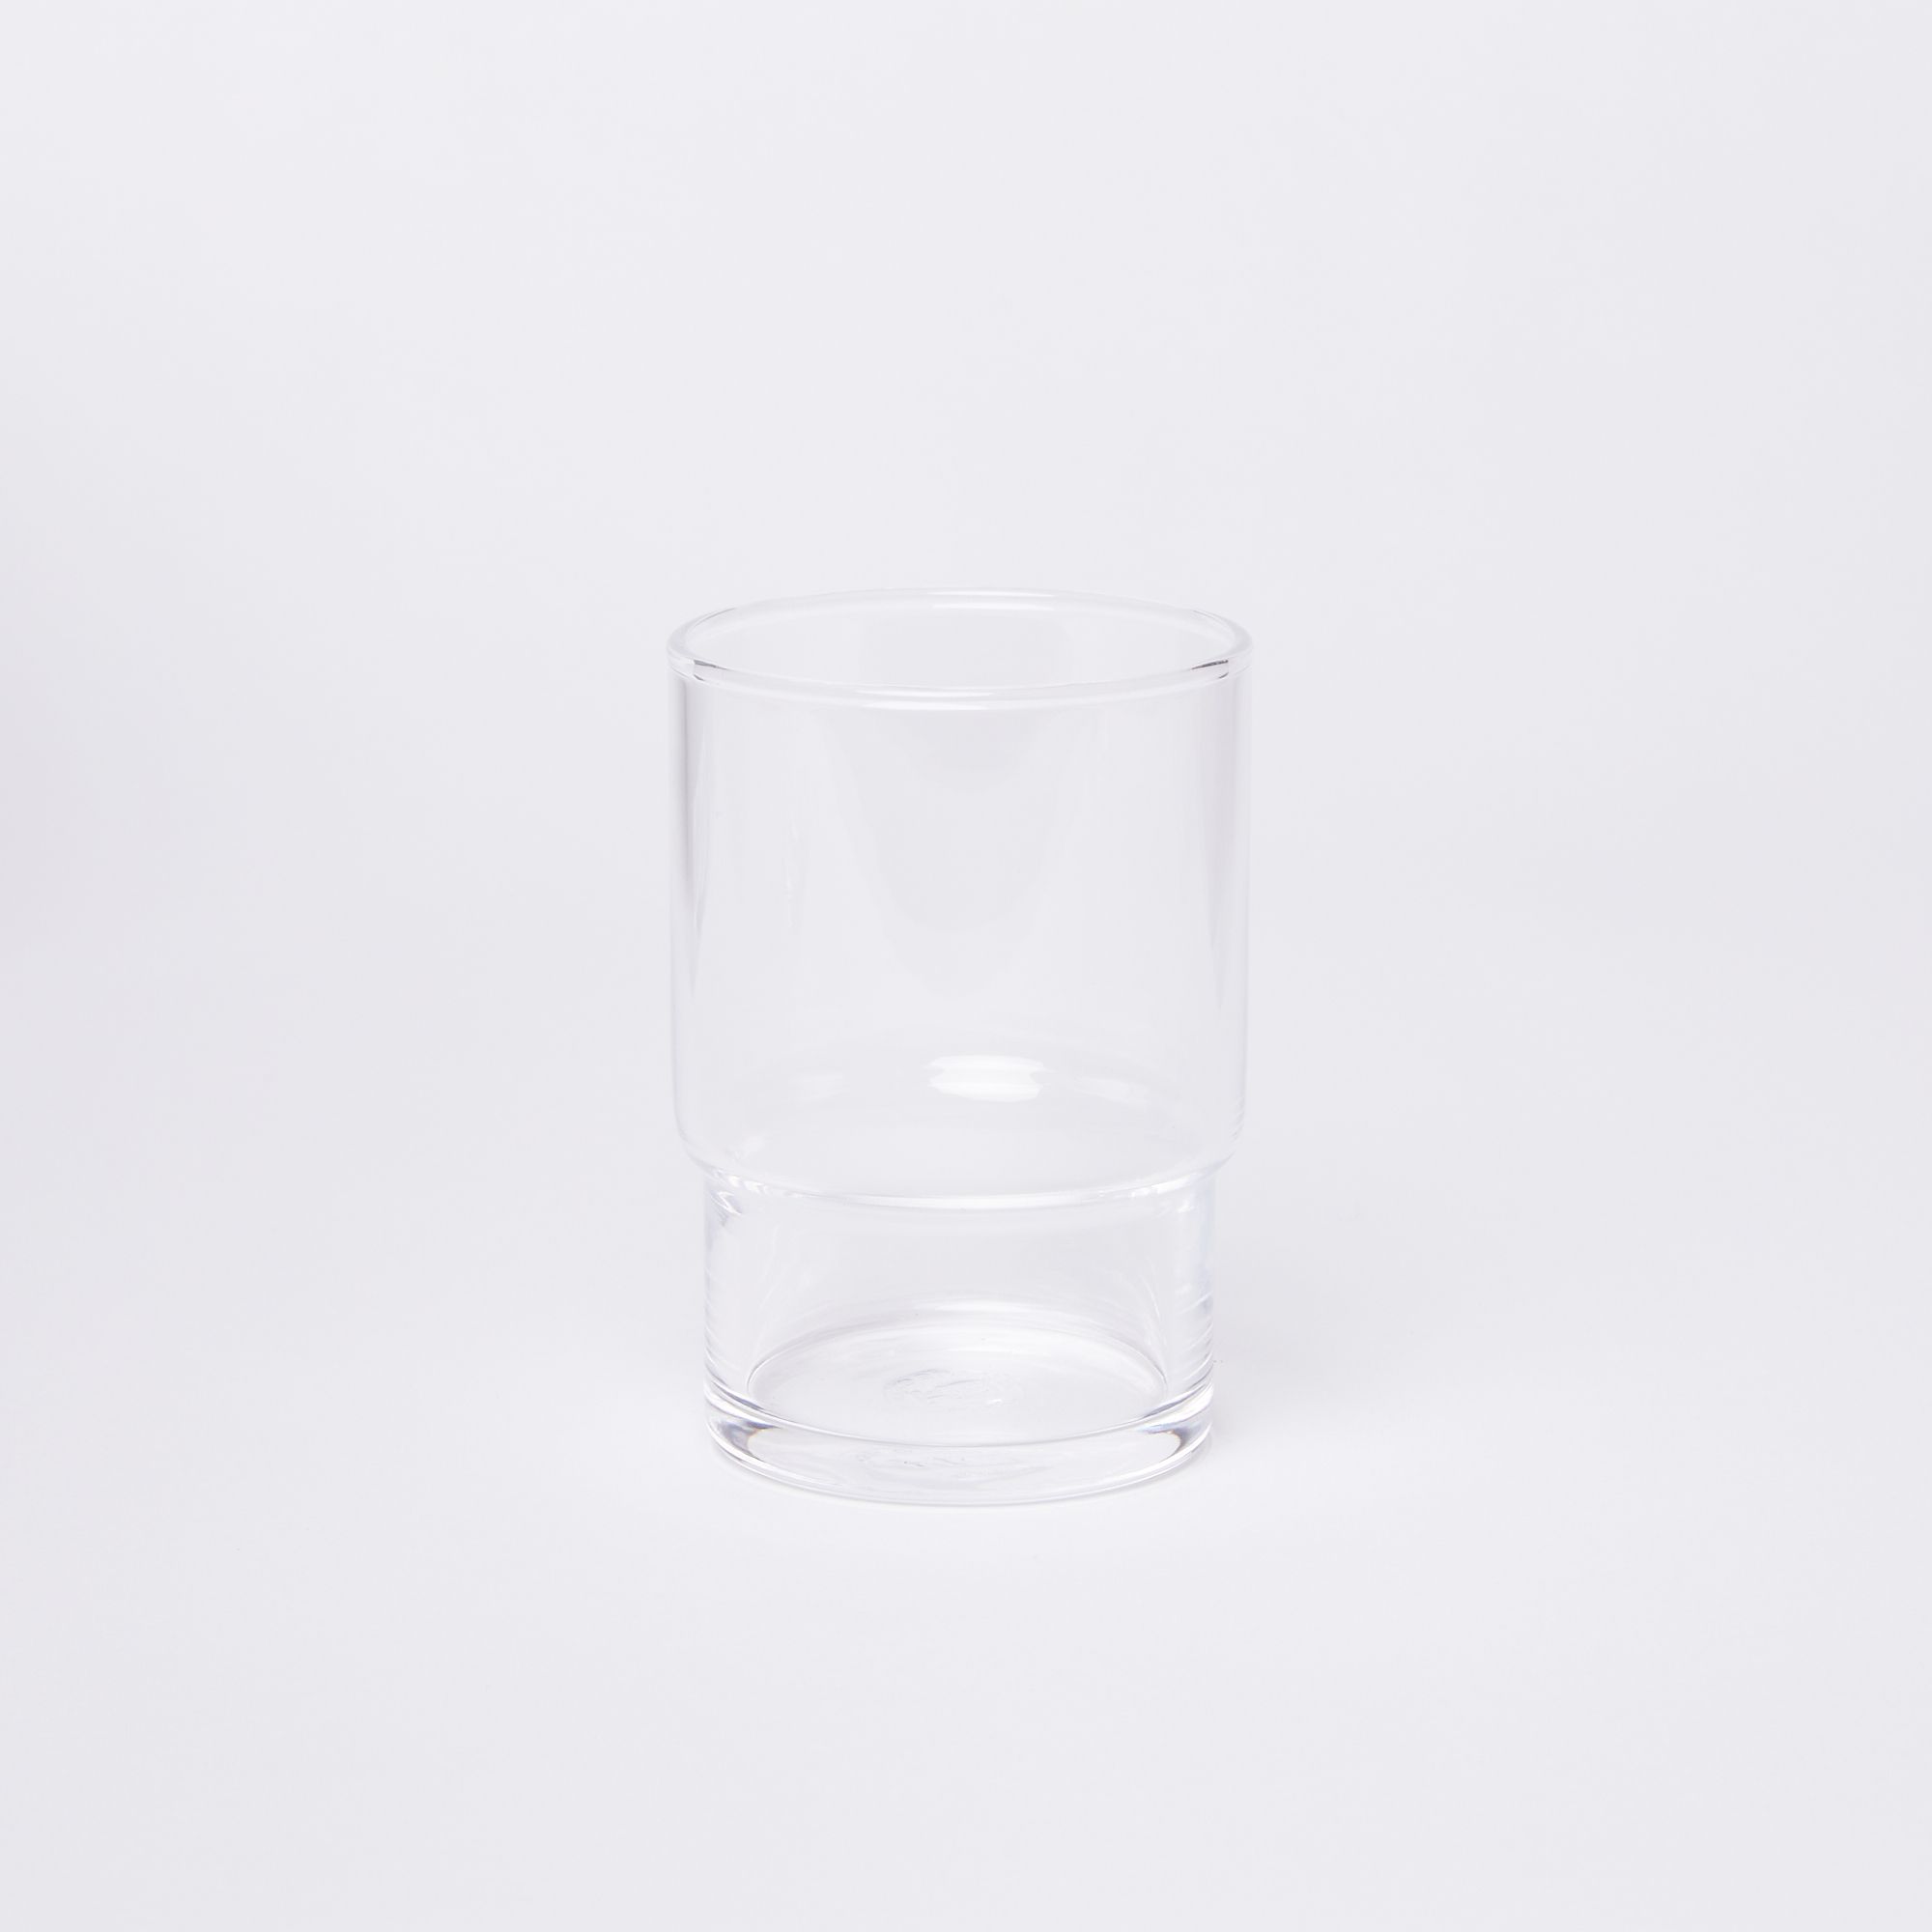 Clear cylindrical glass with a wider top half with a narrower bottom half